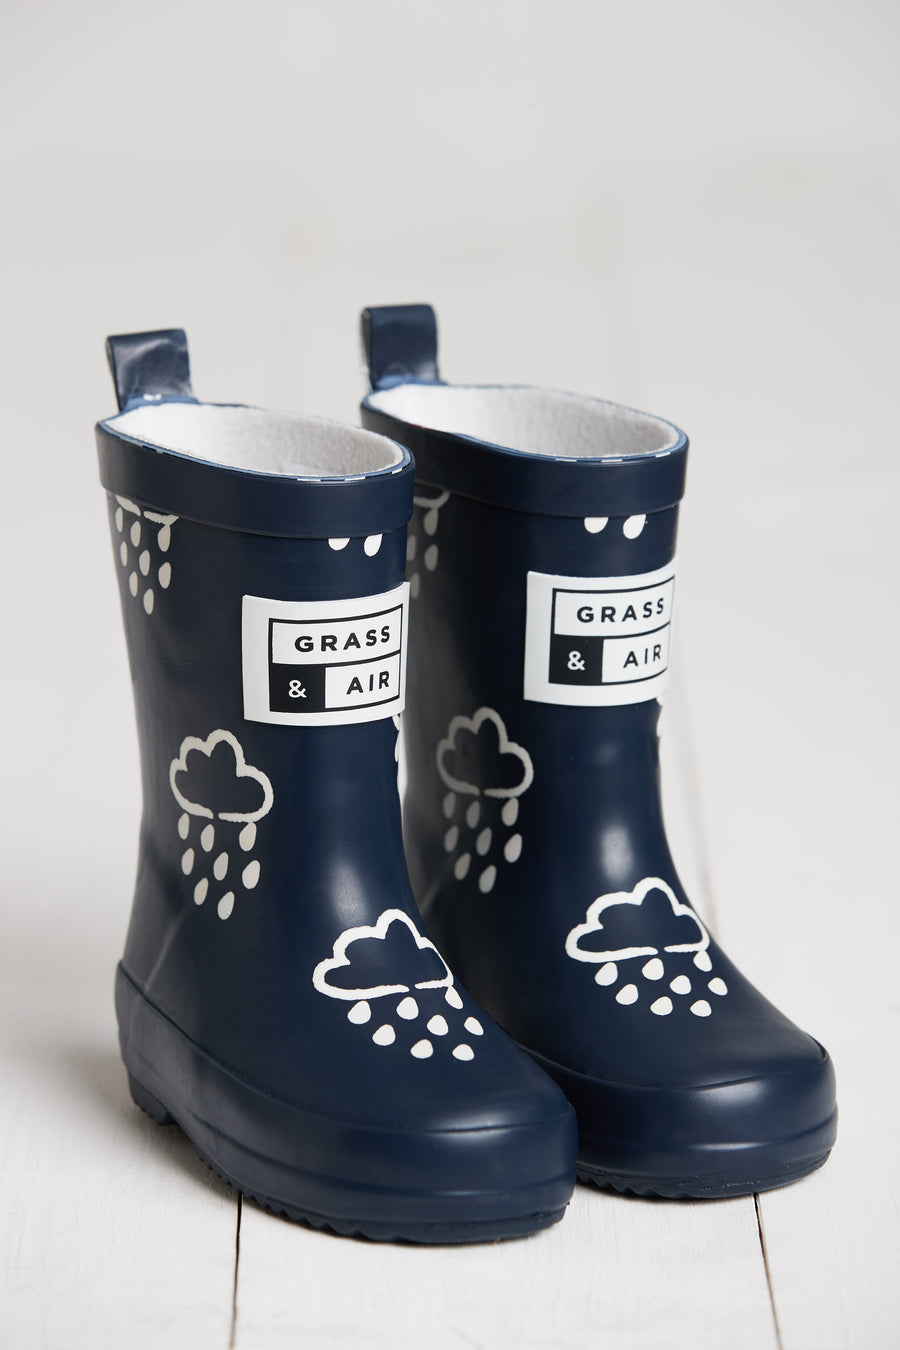 Grass and Air wellies|Infant|Colour Changing|Navy